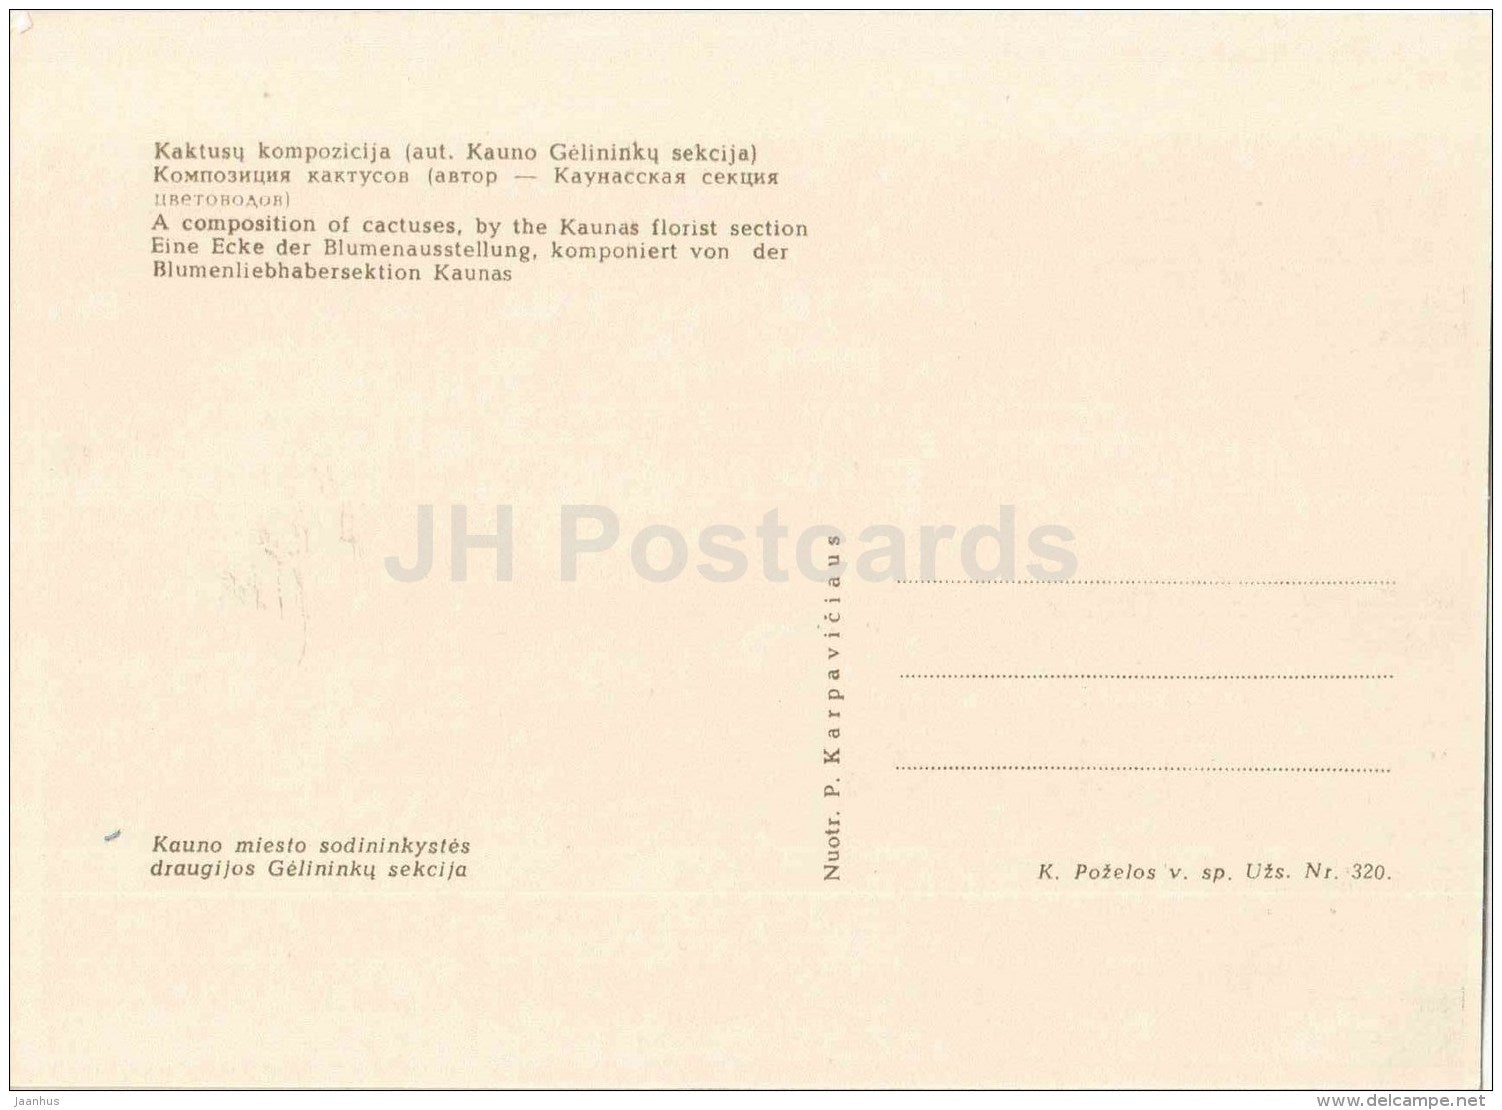 a Composition of Cactuses by the Kaunas Florist Section - 1963 - Lithuania USSR - unused - JH Postcards